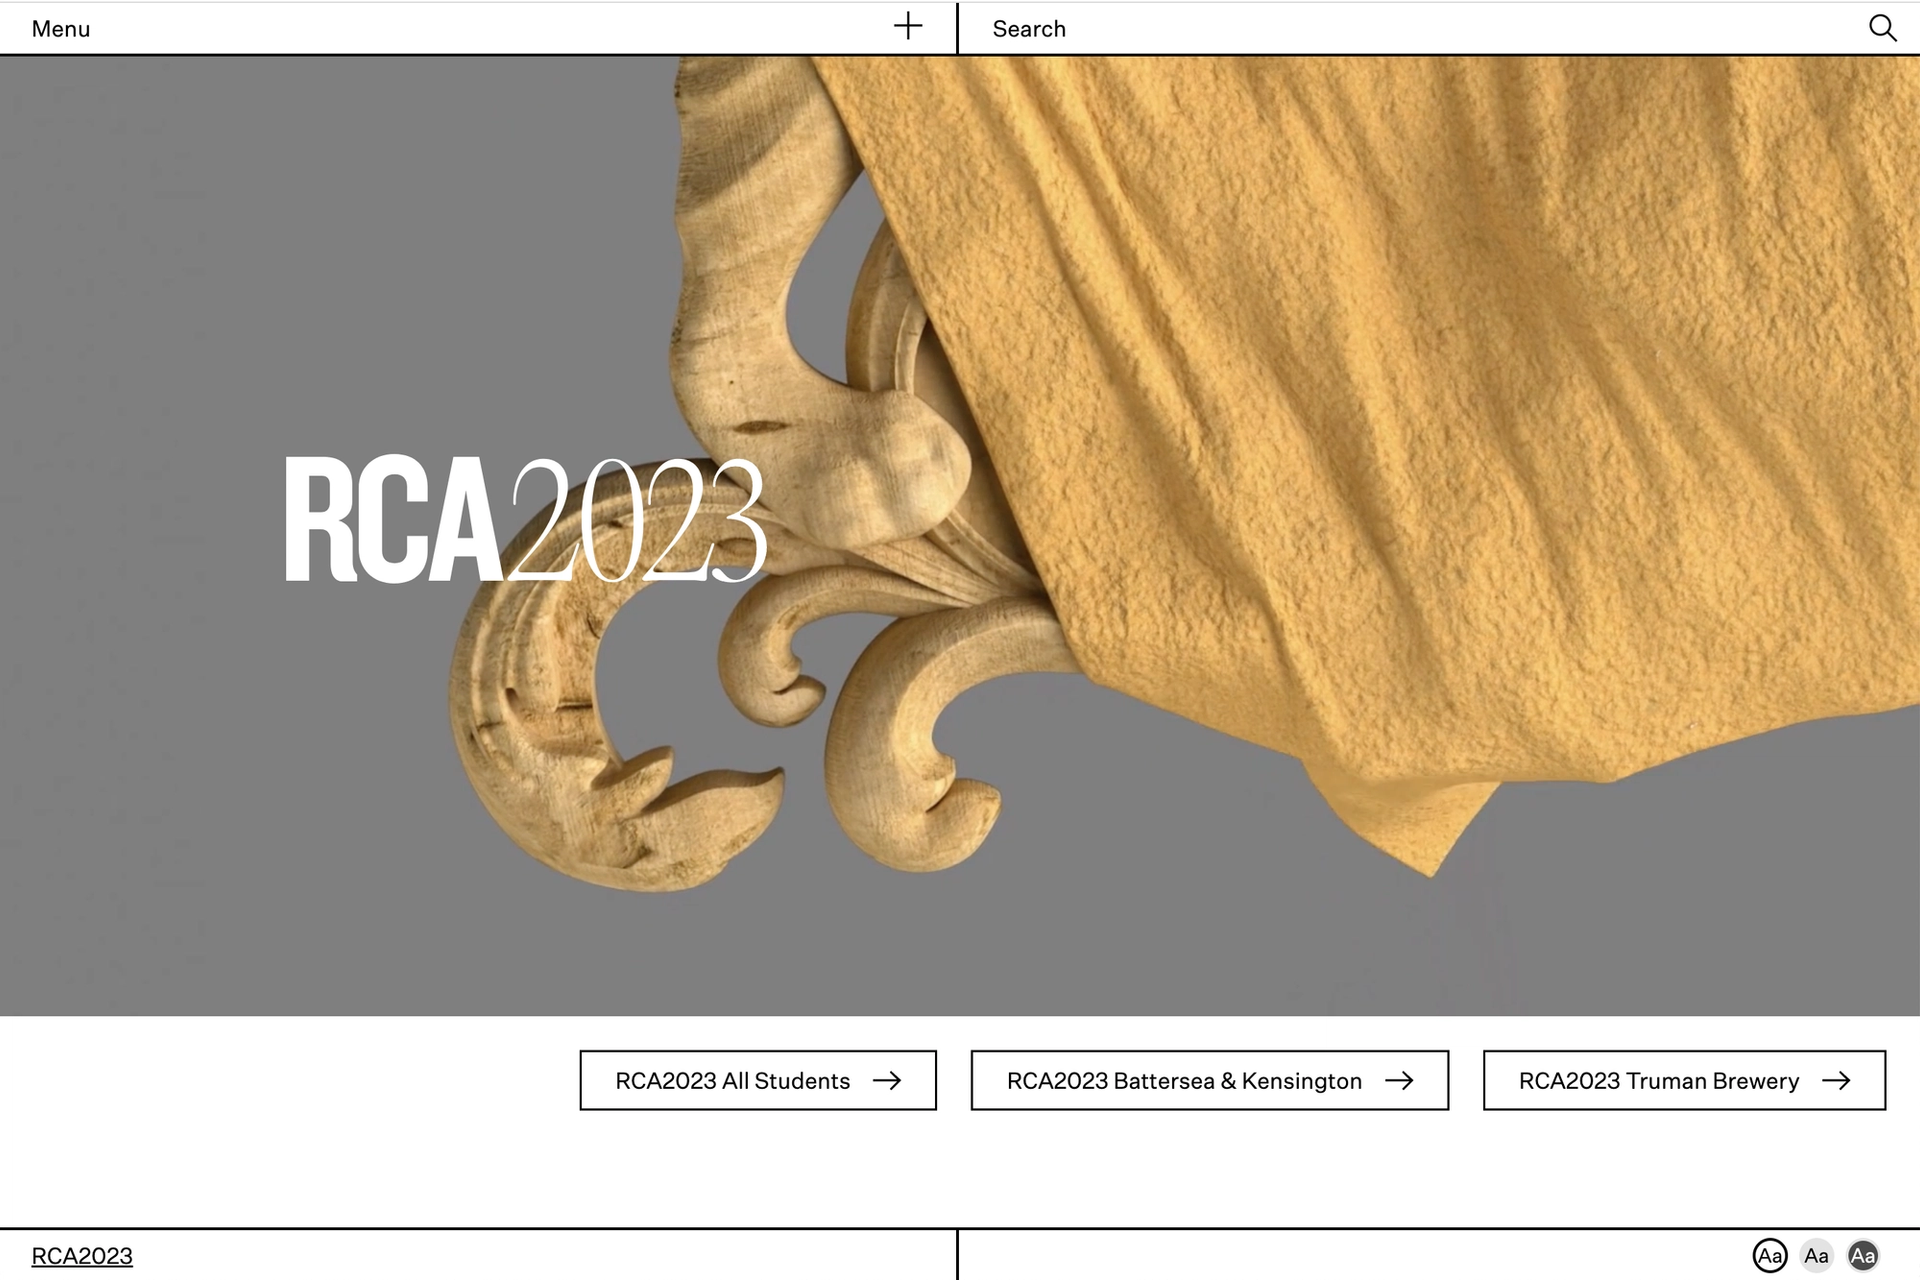 RCA2023 crest in sand cloth